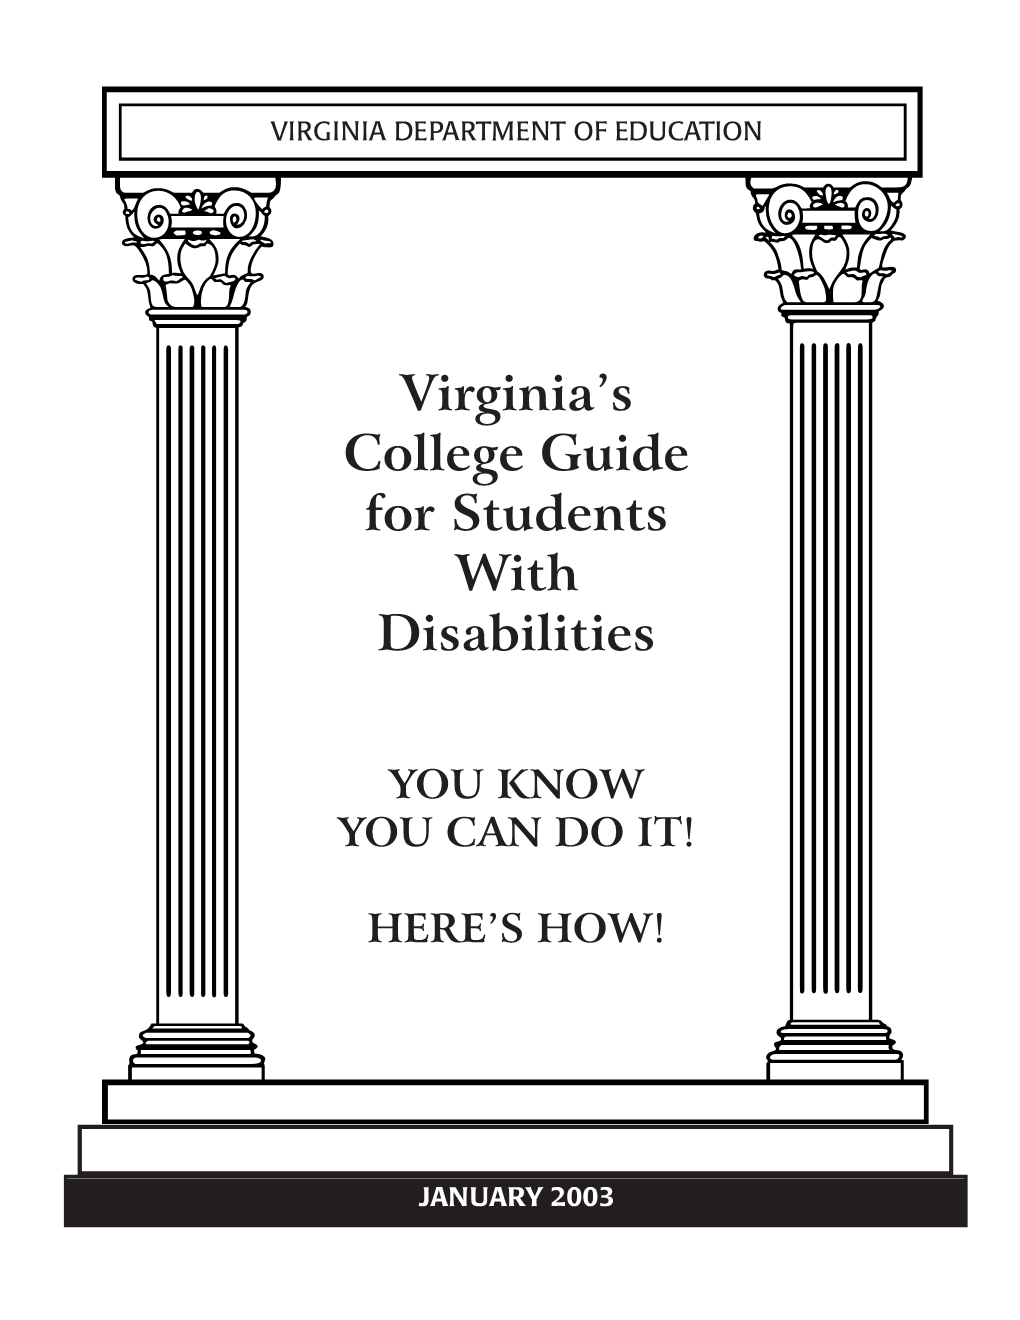 Virginia's College Guide for Students with Disabilities